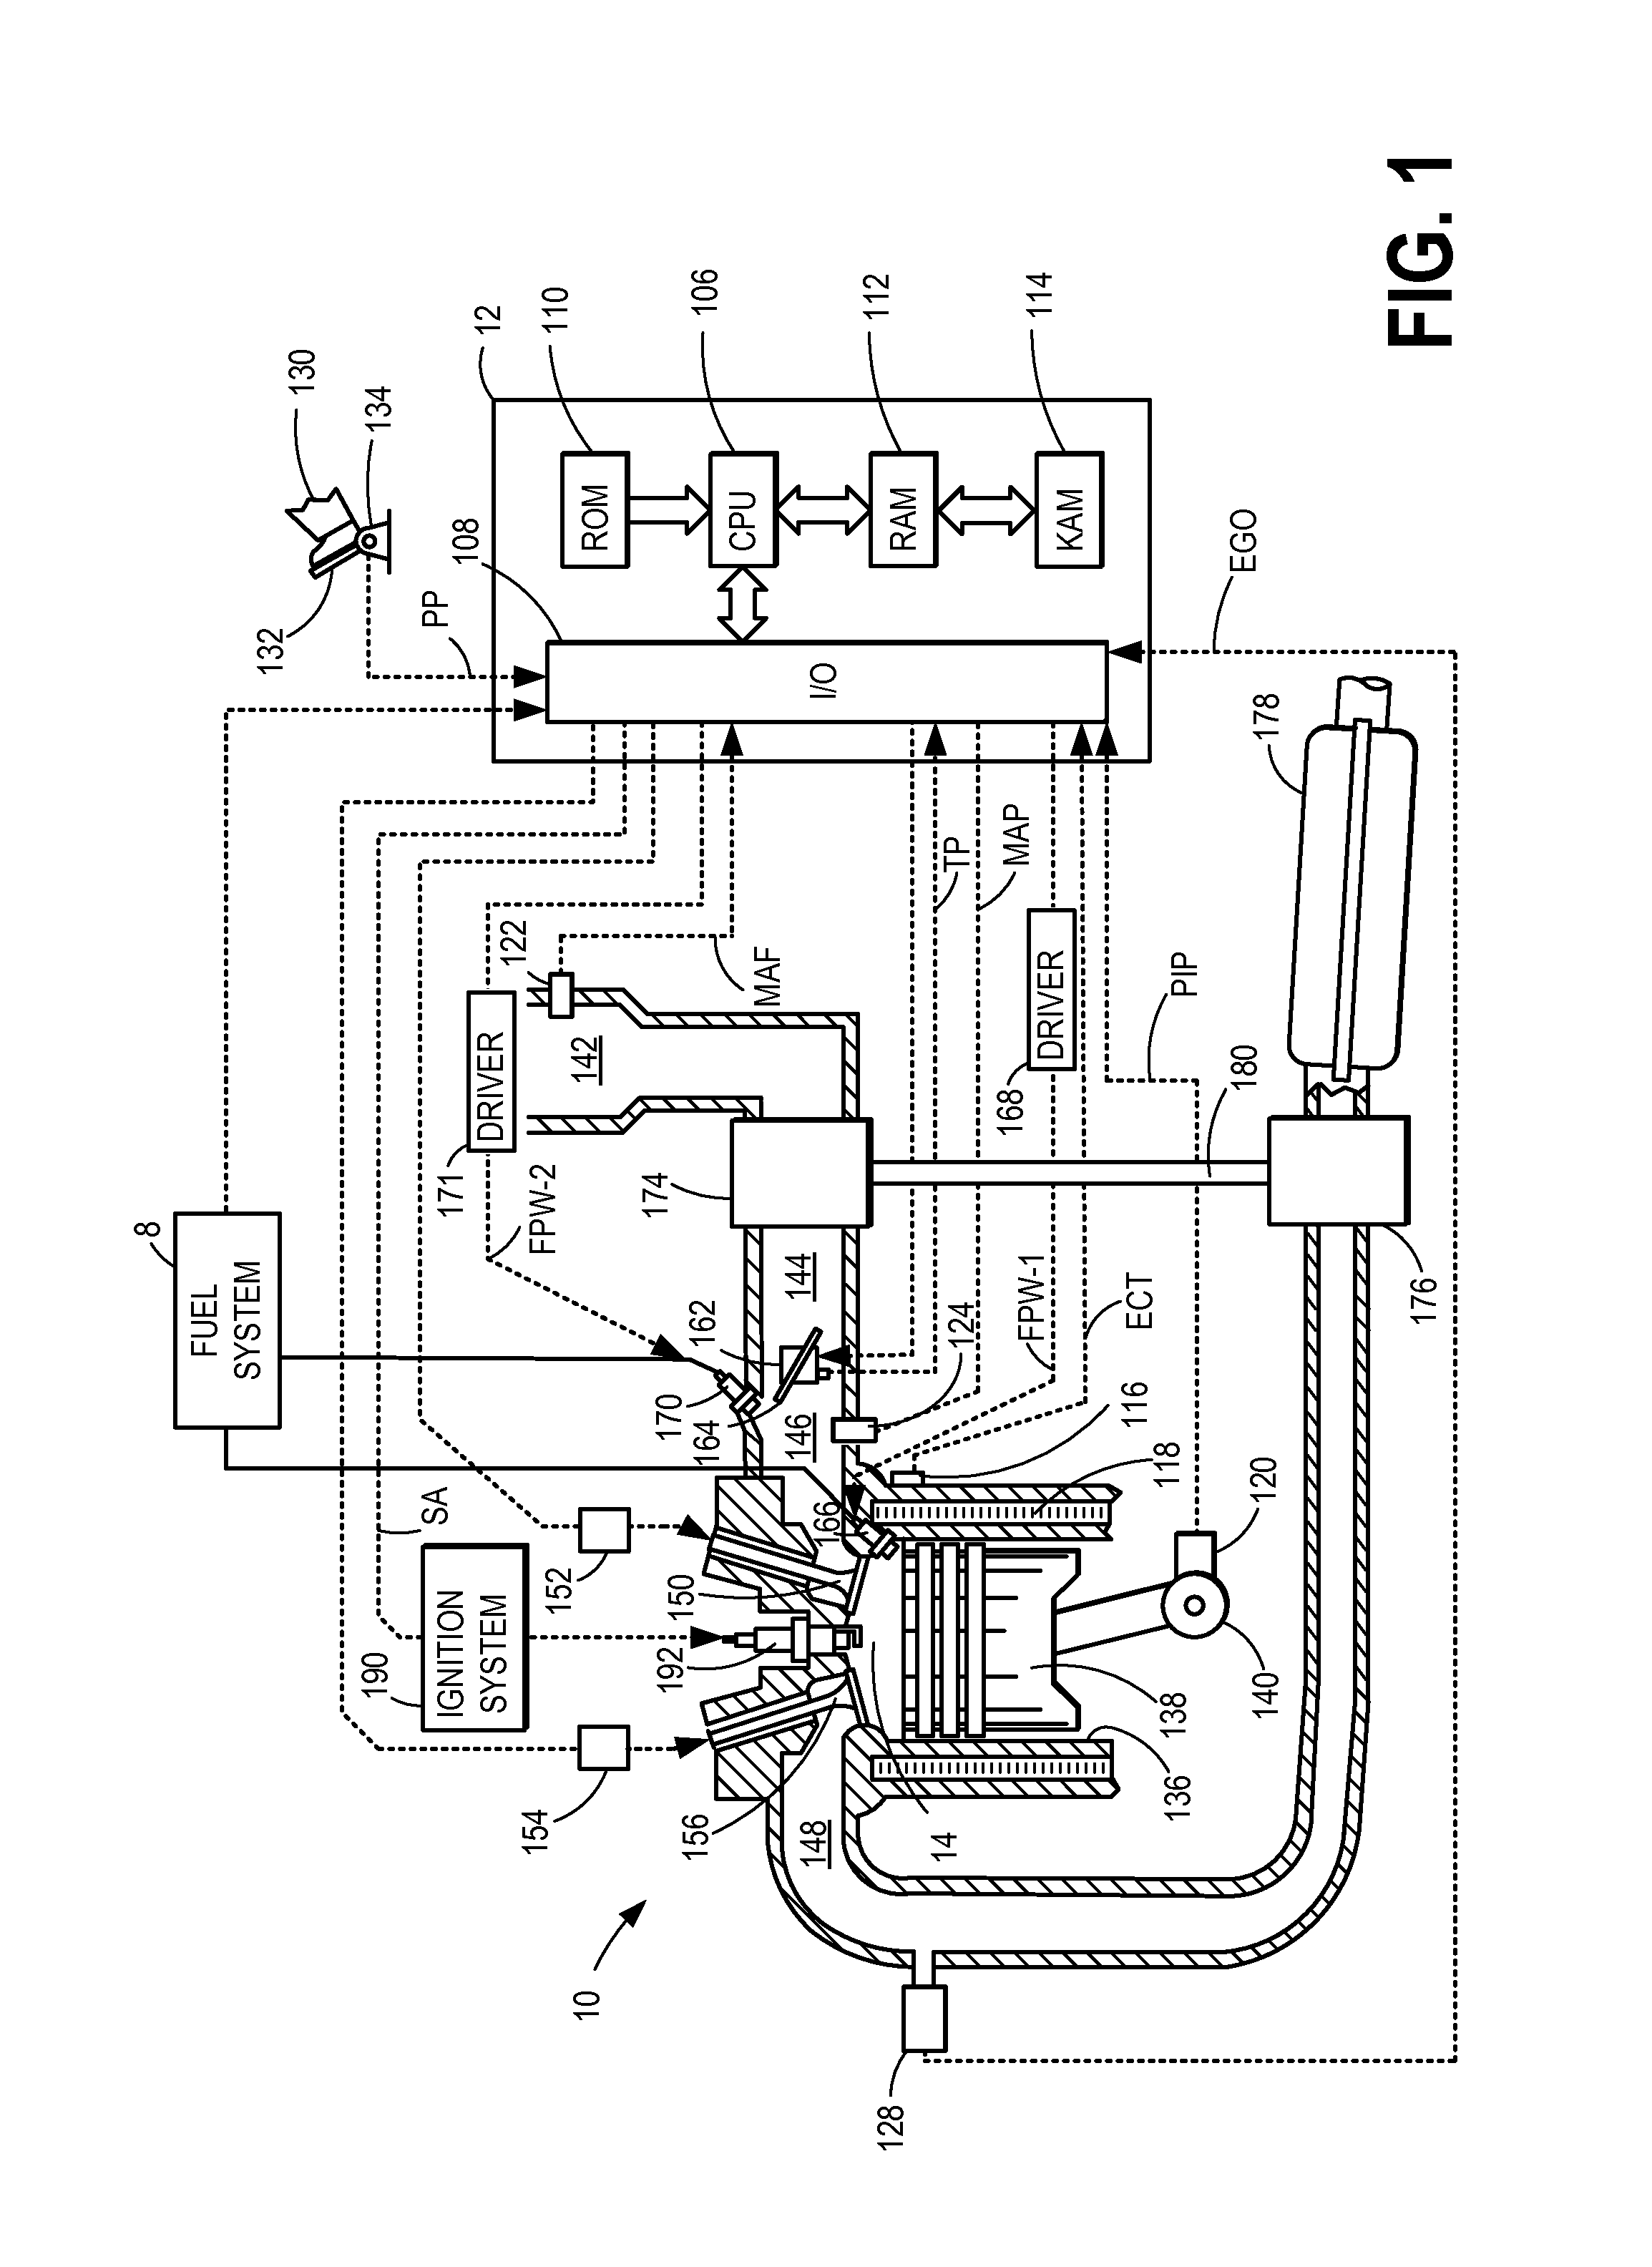 Methods and systems for fixed and variable pressure fuel injection